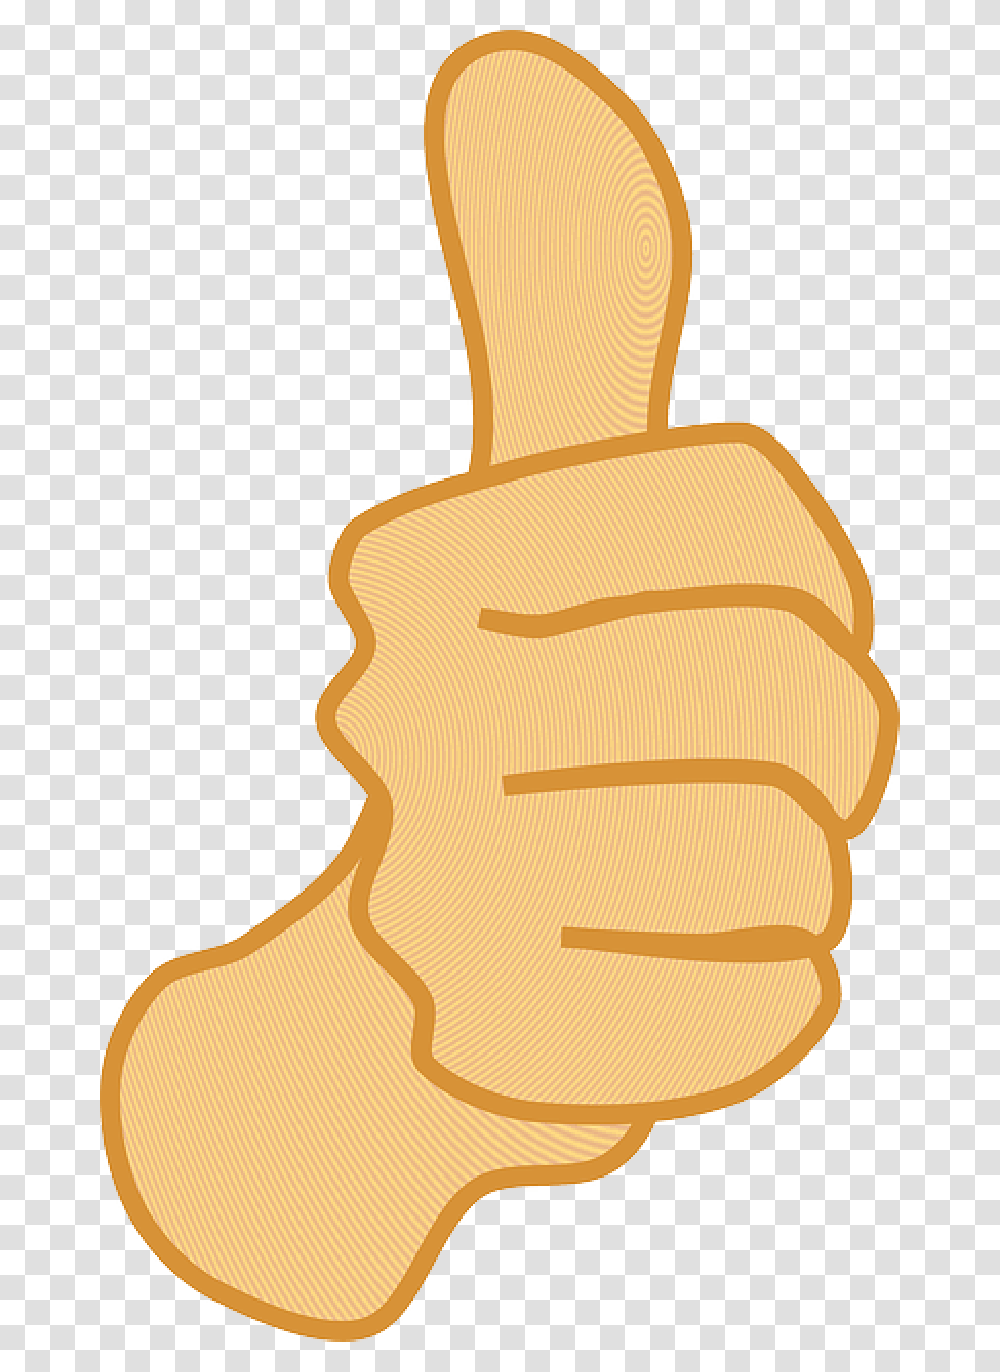 Sign Black Icon Two Symbol Hand Drawing People Thumbs Up Clipart, Finger, Fist, Chair, Sweets Transparent Png